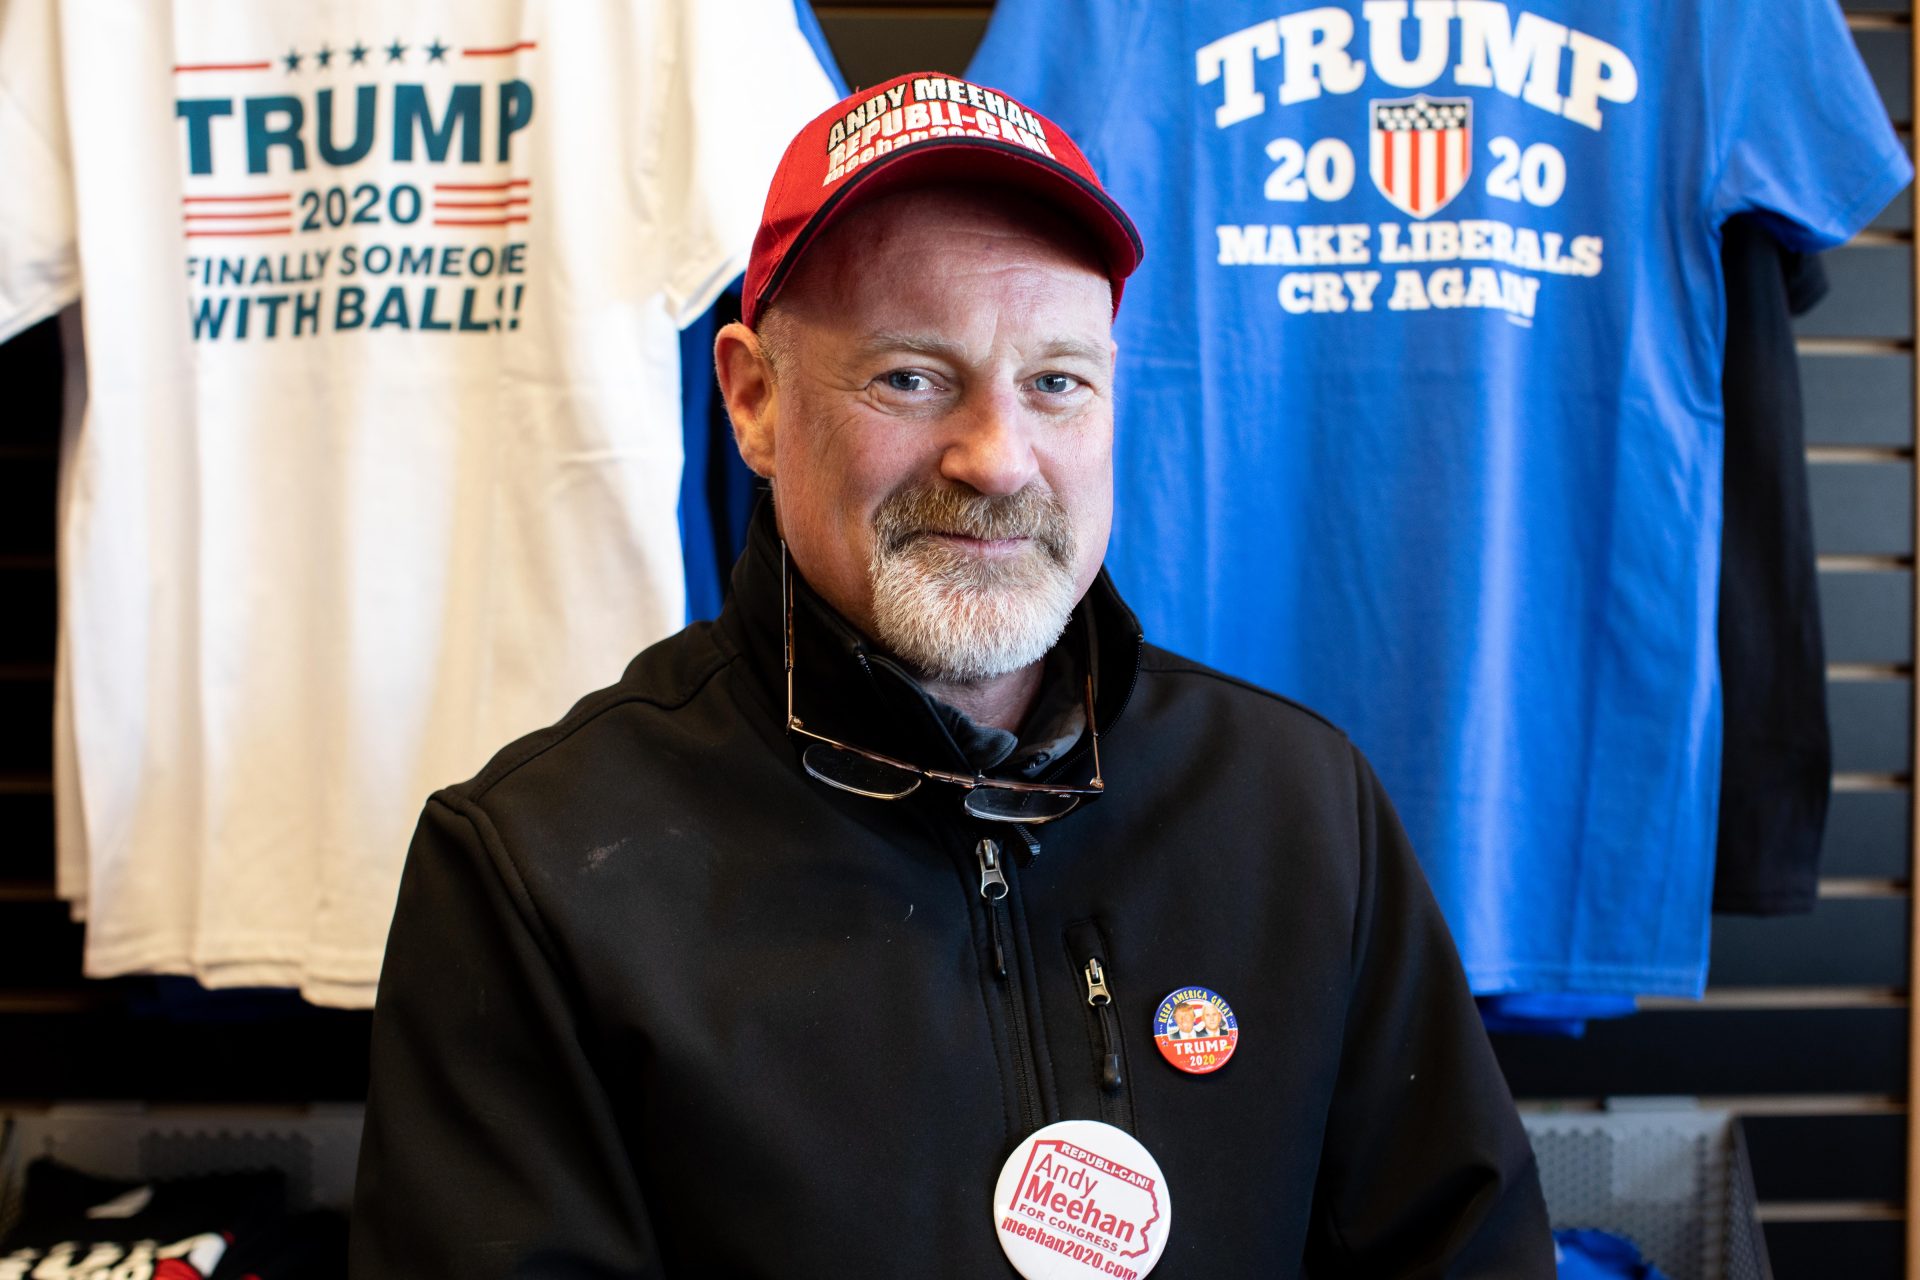 Andy Meehan is running for Congress in Pennsylvania's District 1 against Brian Fitzpatrick and has found the Trump Store to be a great location to collect signatures for the ballot.